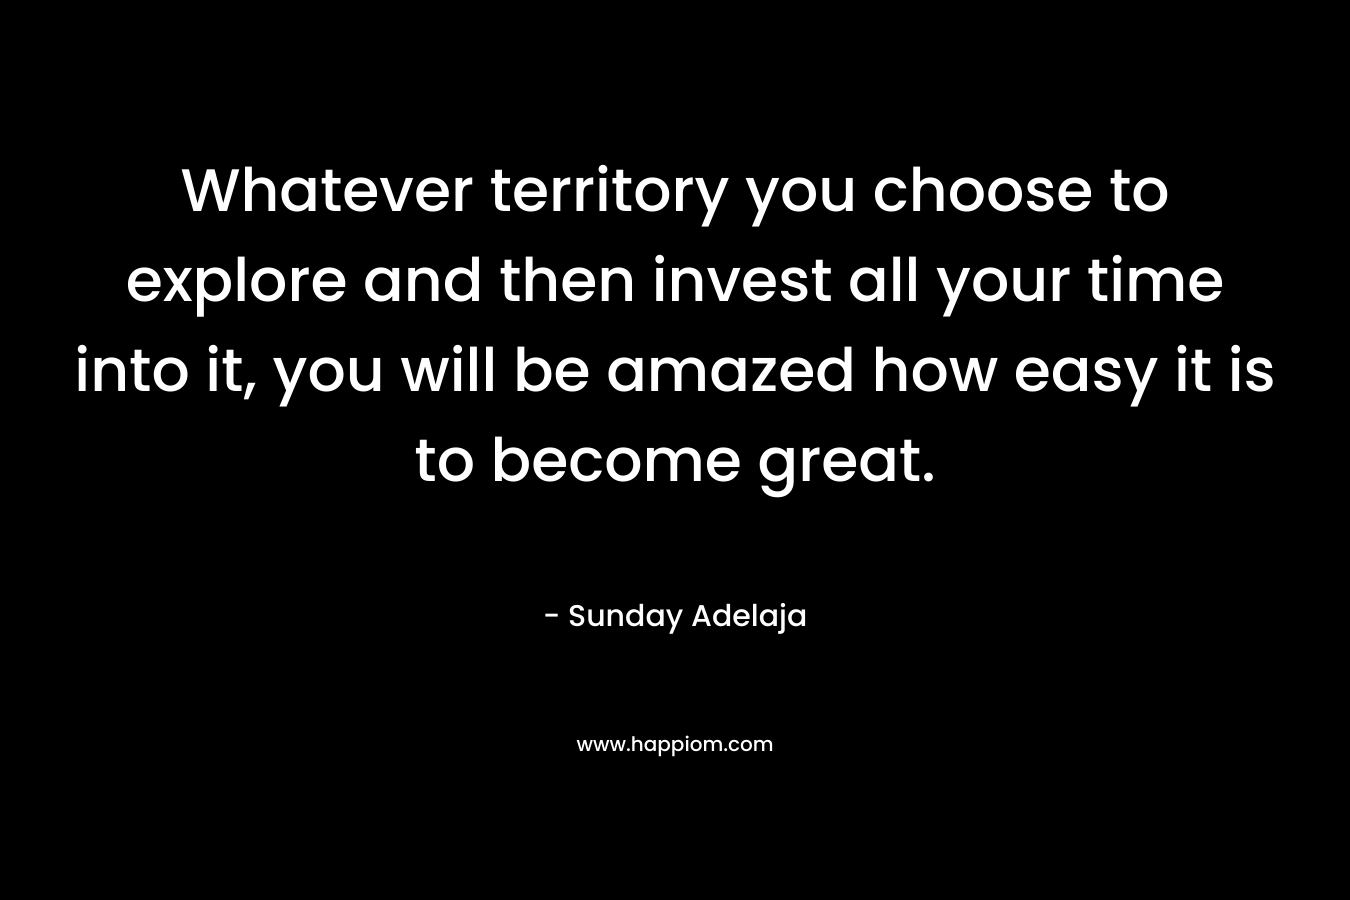 Whatever territory you choose to explore and then invest all your time into it, you will be amazed how easy it is to become great.